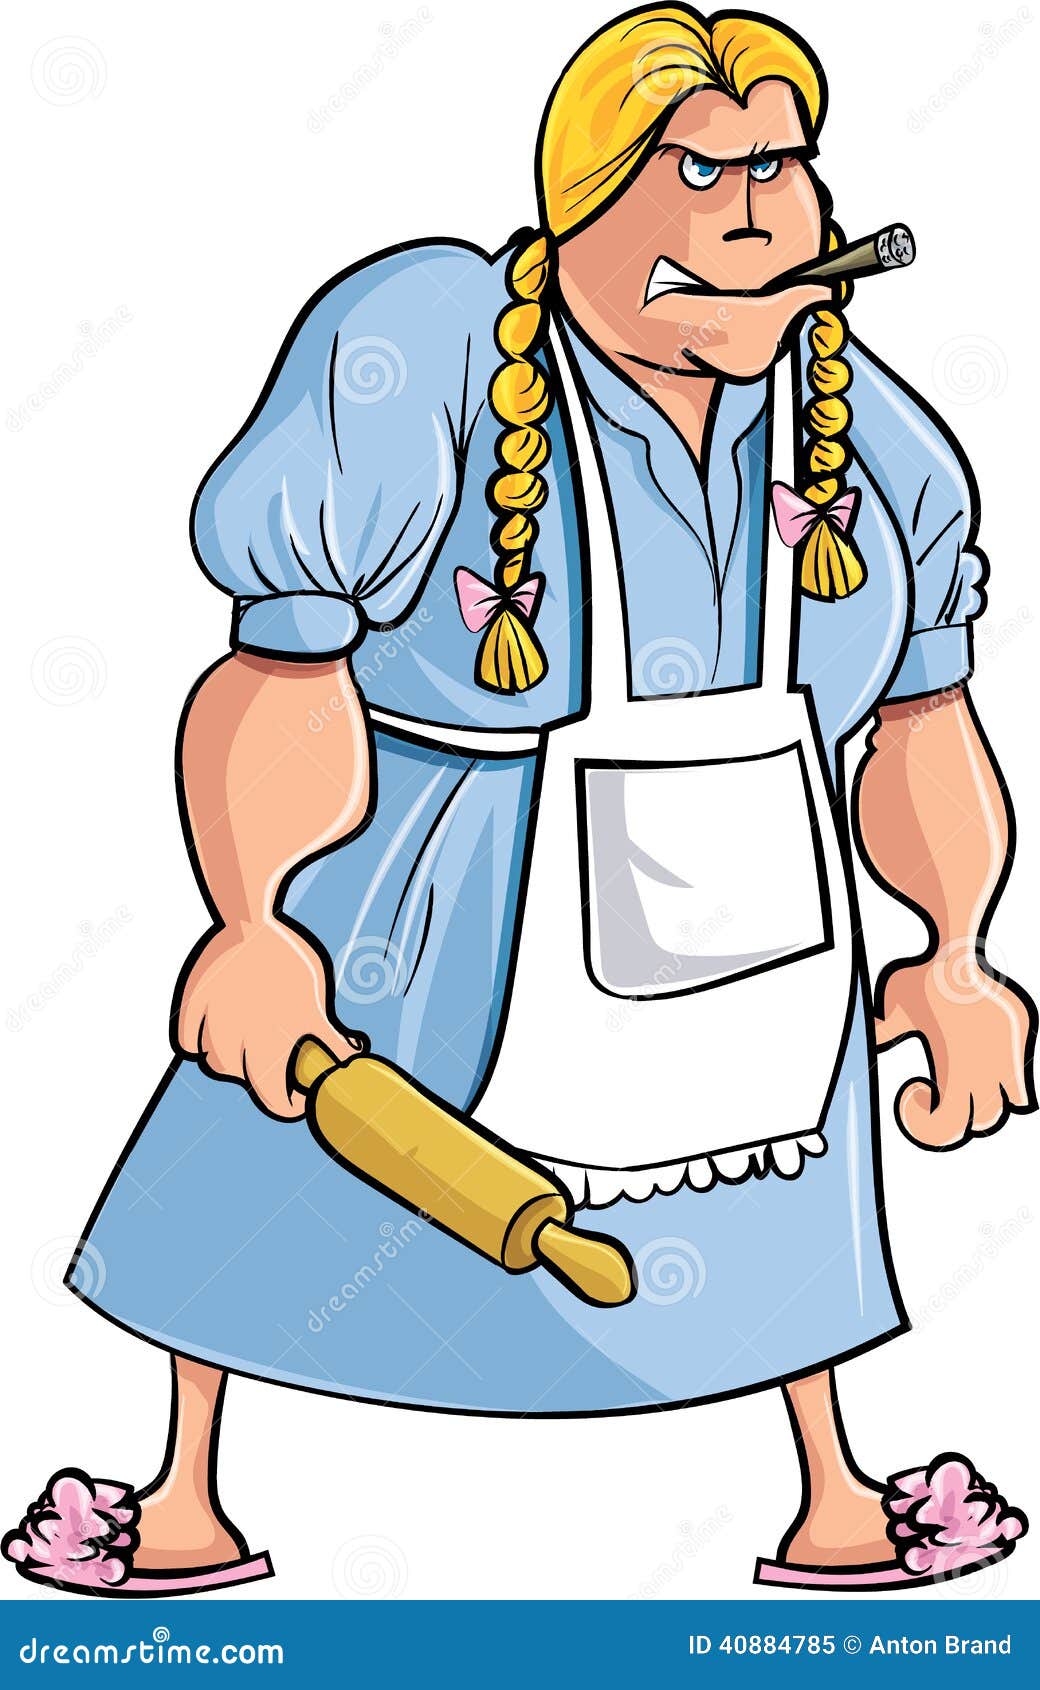 [Image: cartoon-angry-woman-rolling-pin-isolated-40884785.jpg]